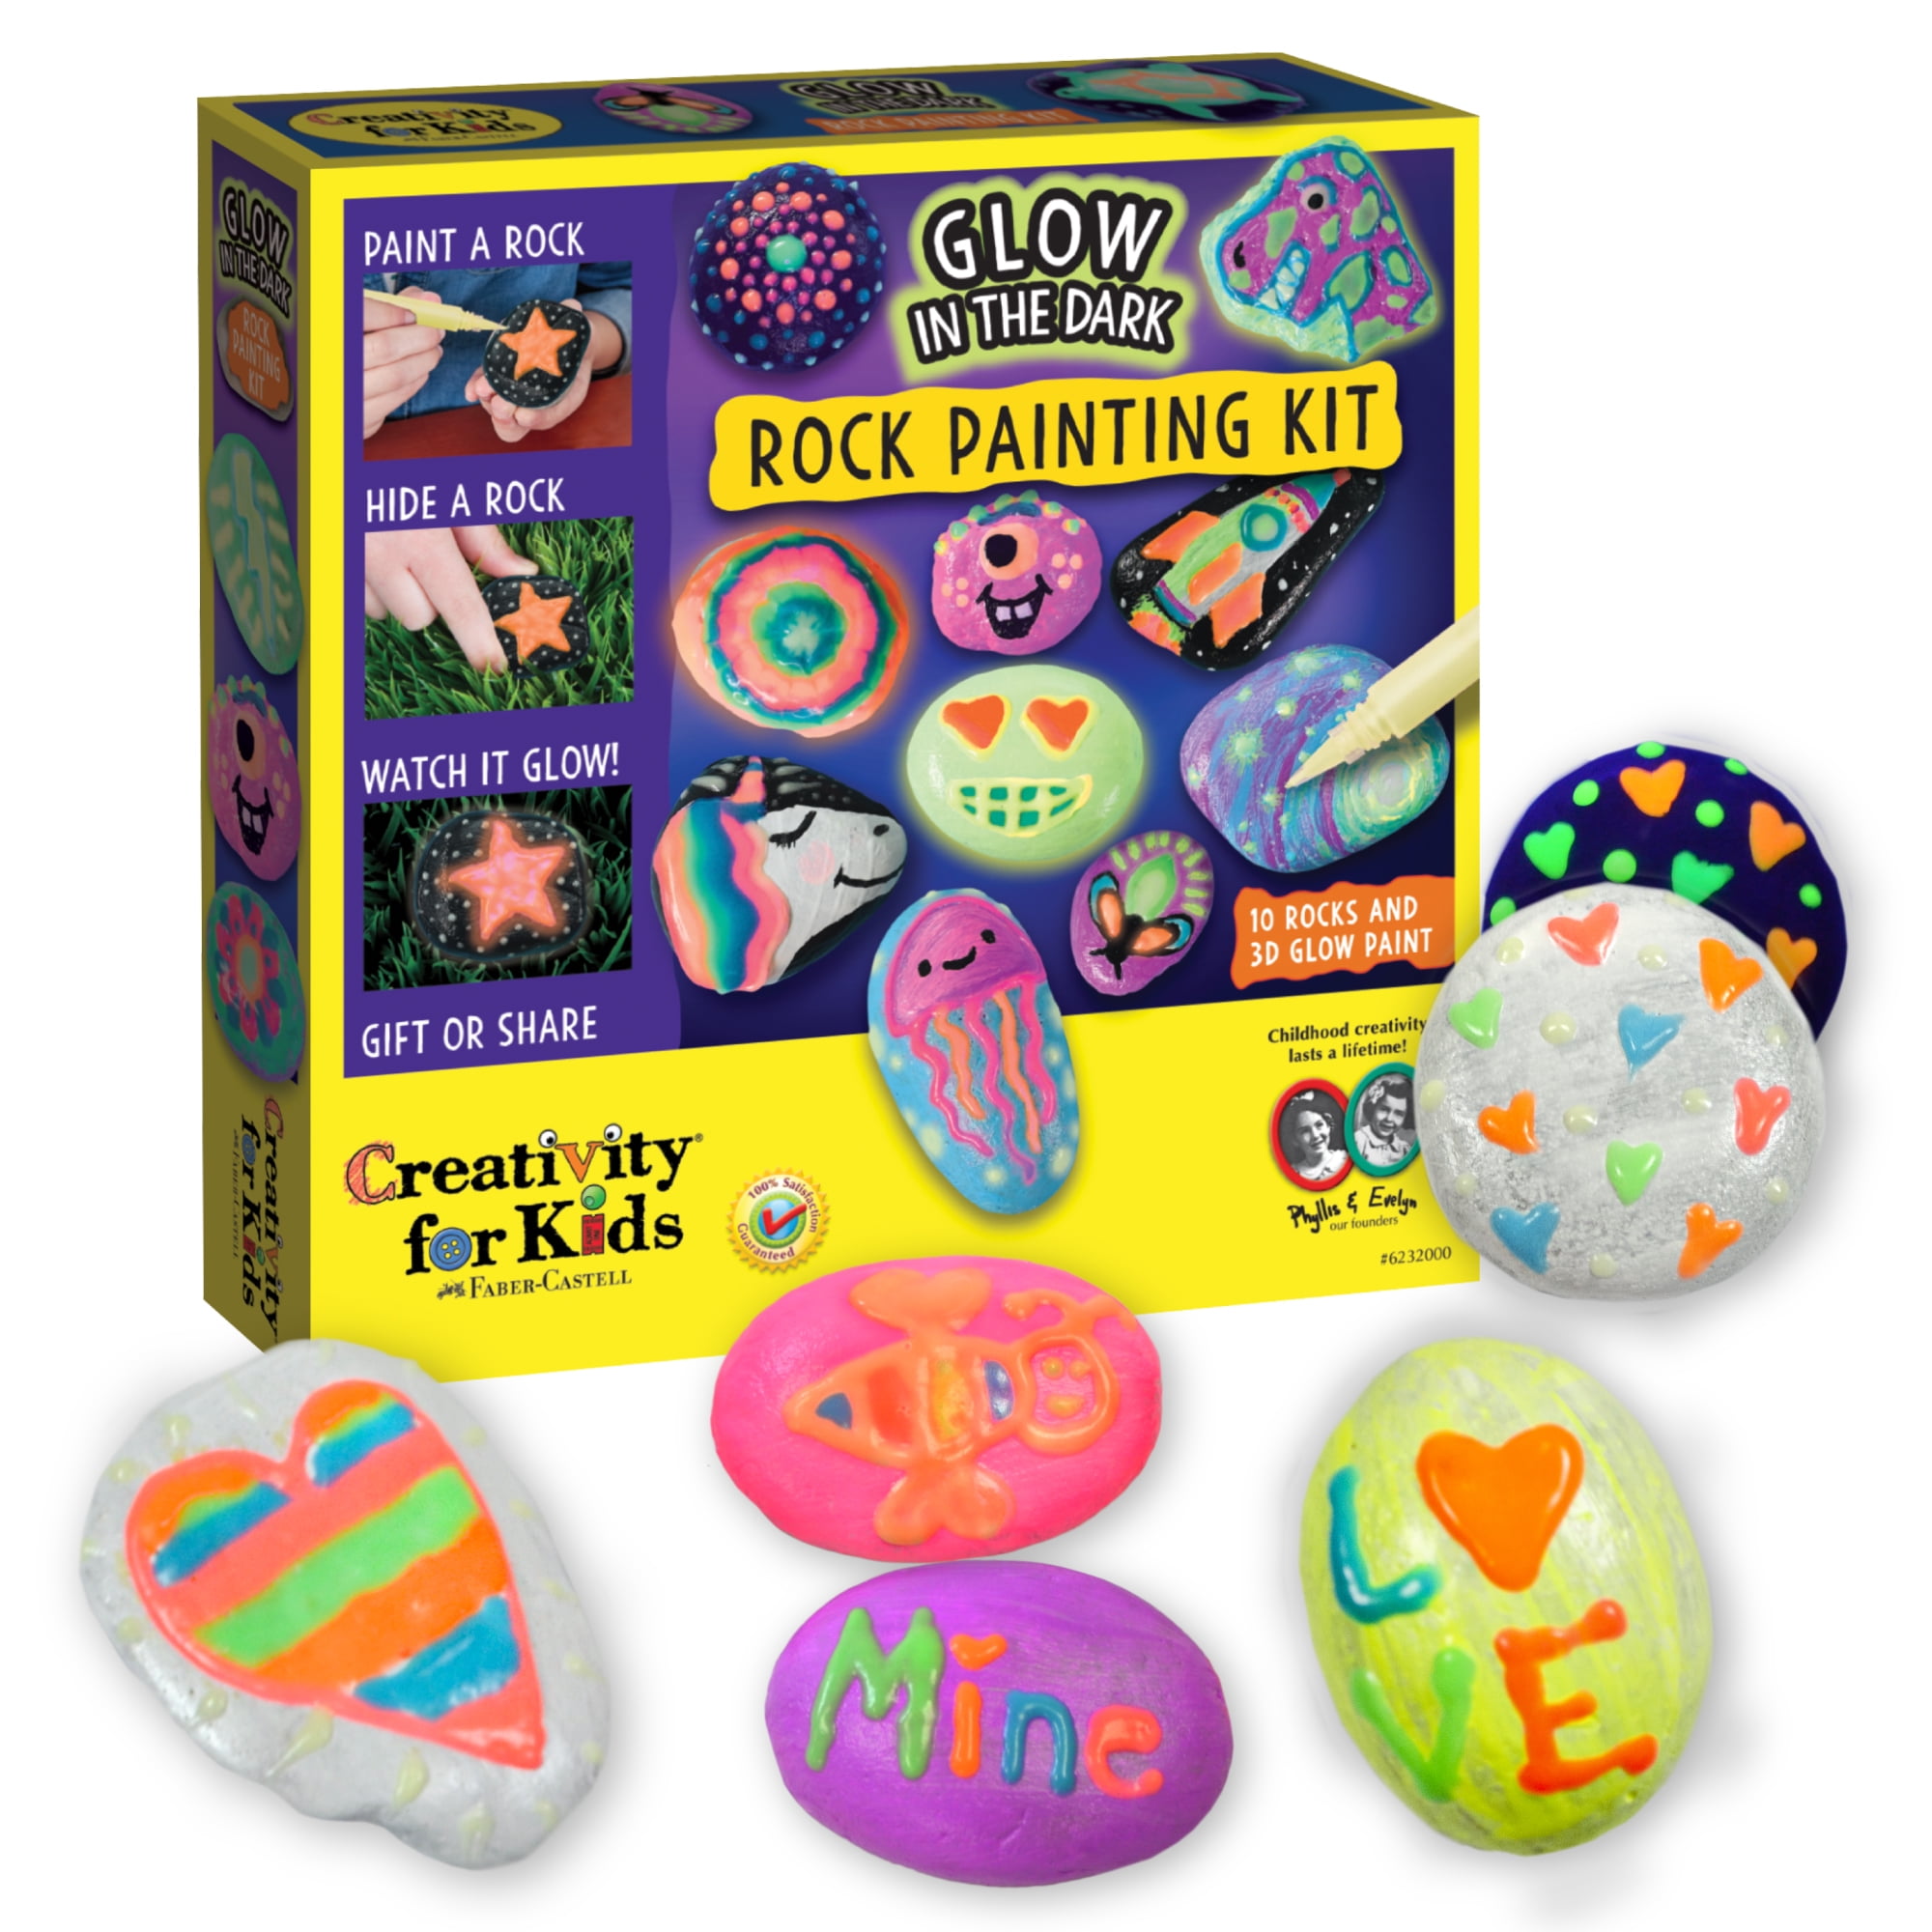 JOYIN 12 Rock Painting Kit- Glow in The Dark, 43 Pcs Arts and Crafts for  Kids